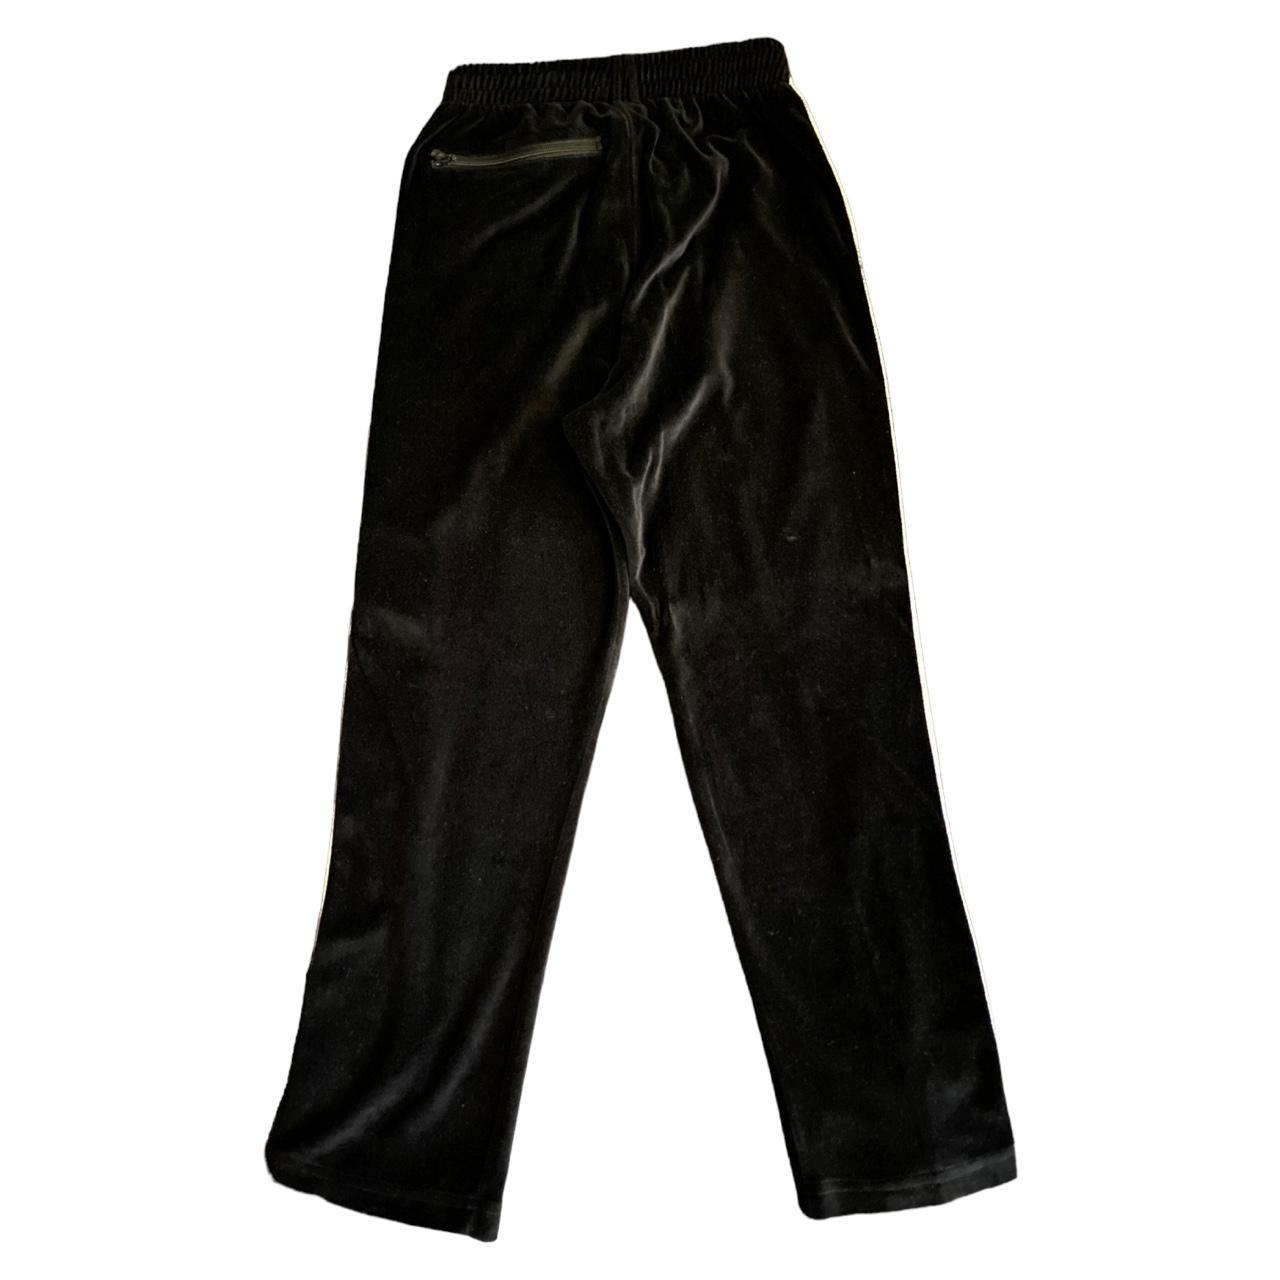 Needles Men's Black and Silver Joggers-tracksuits (2)